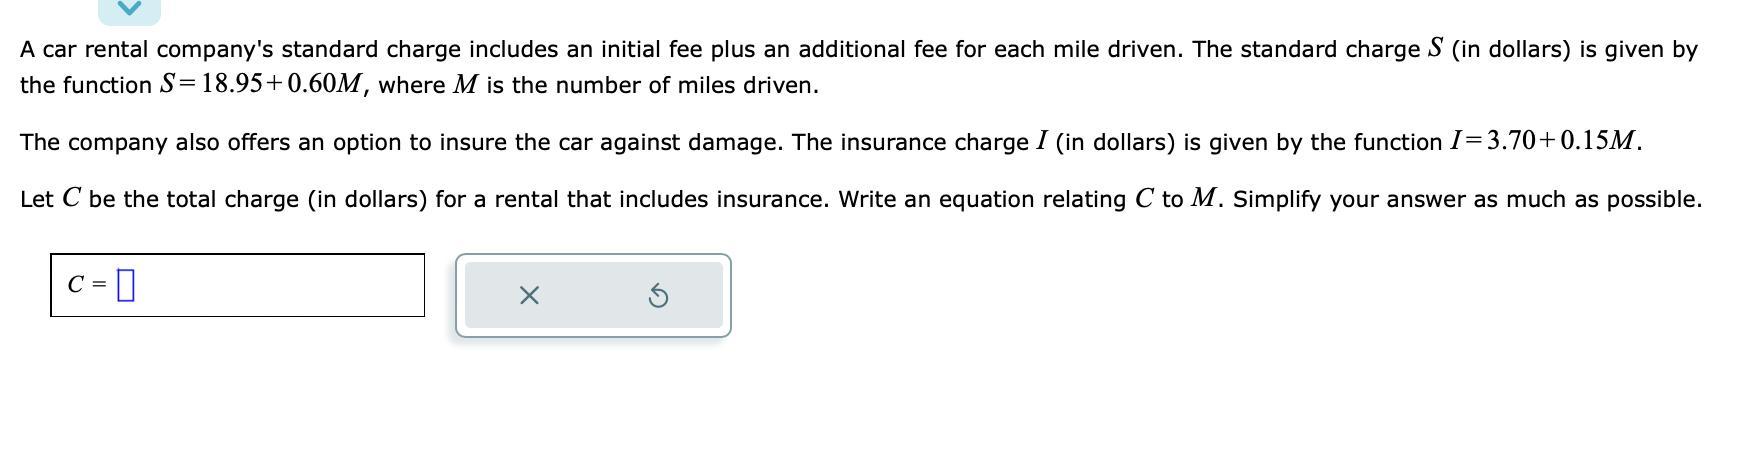 A Car Rental Company's Standard Charge Includes An Initial Fee Plus An Additional Fee For Each Mile Driven.